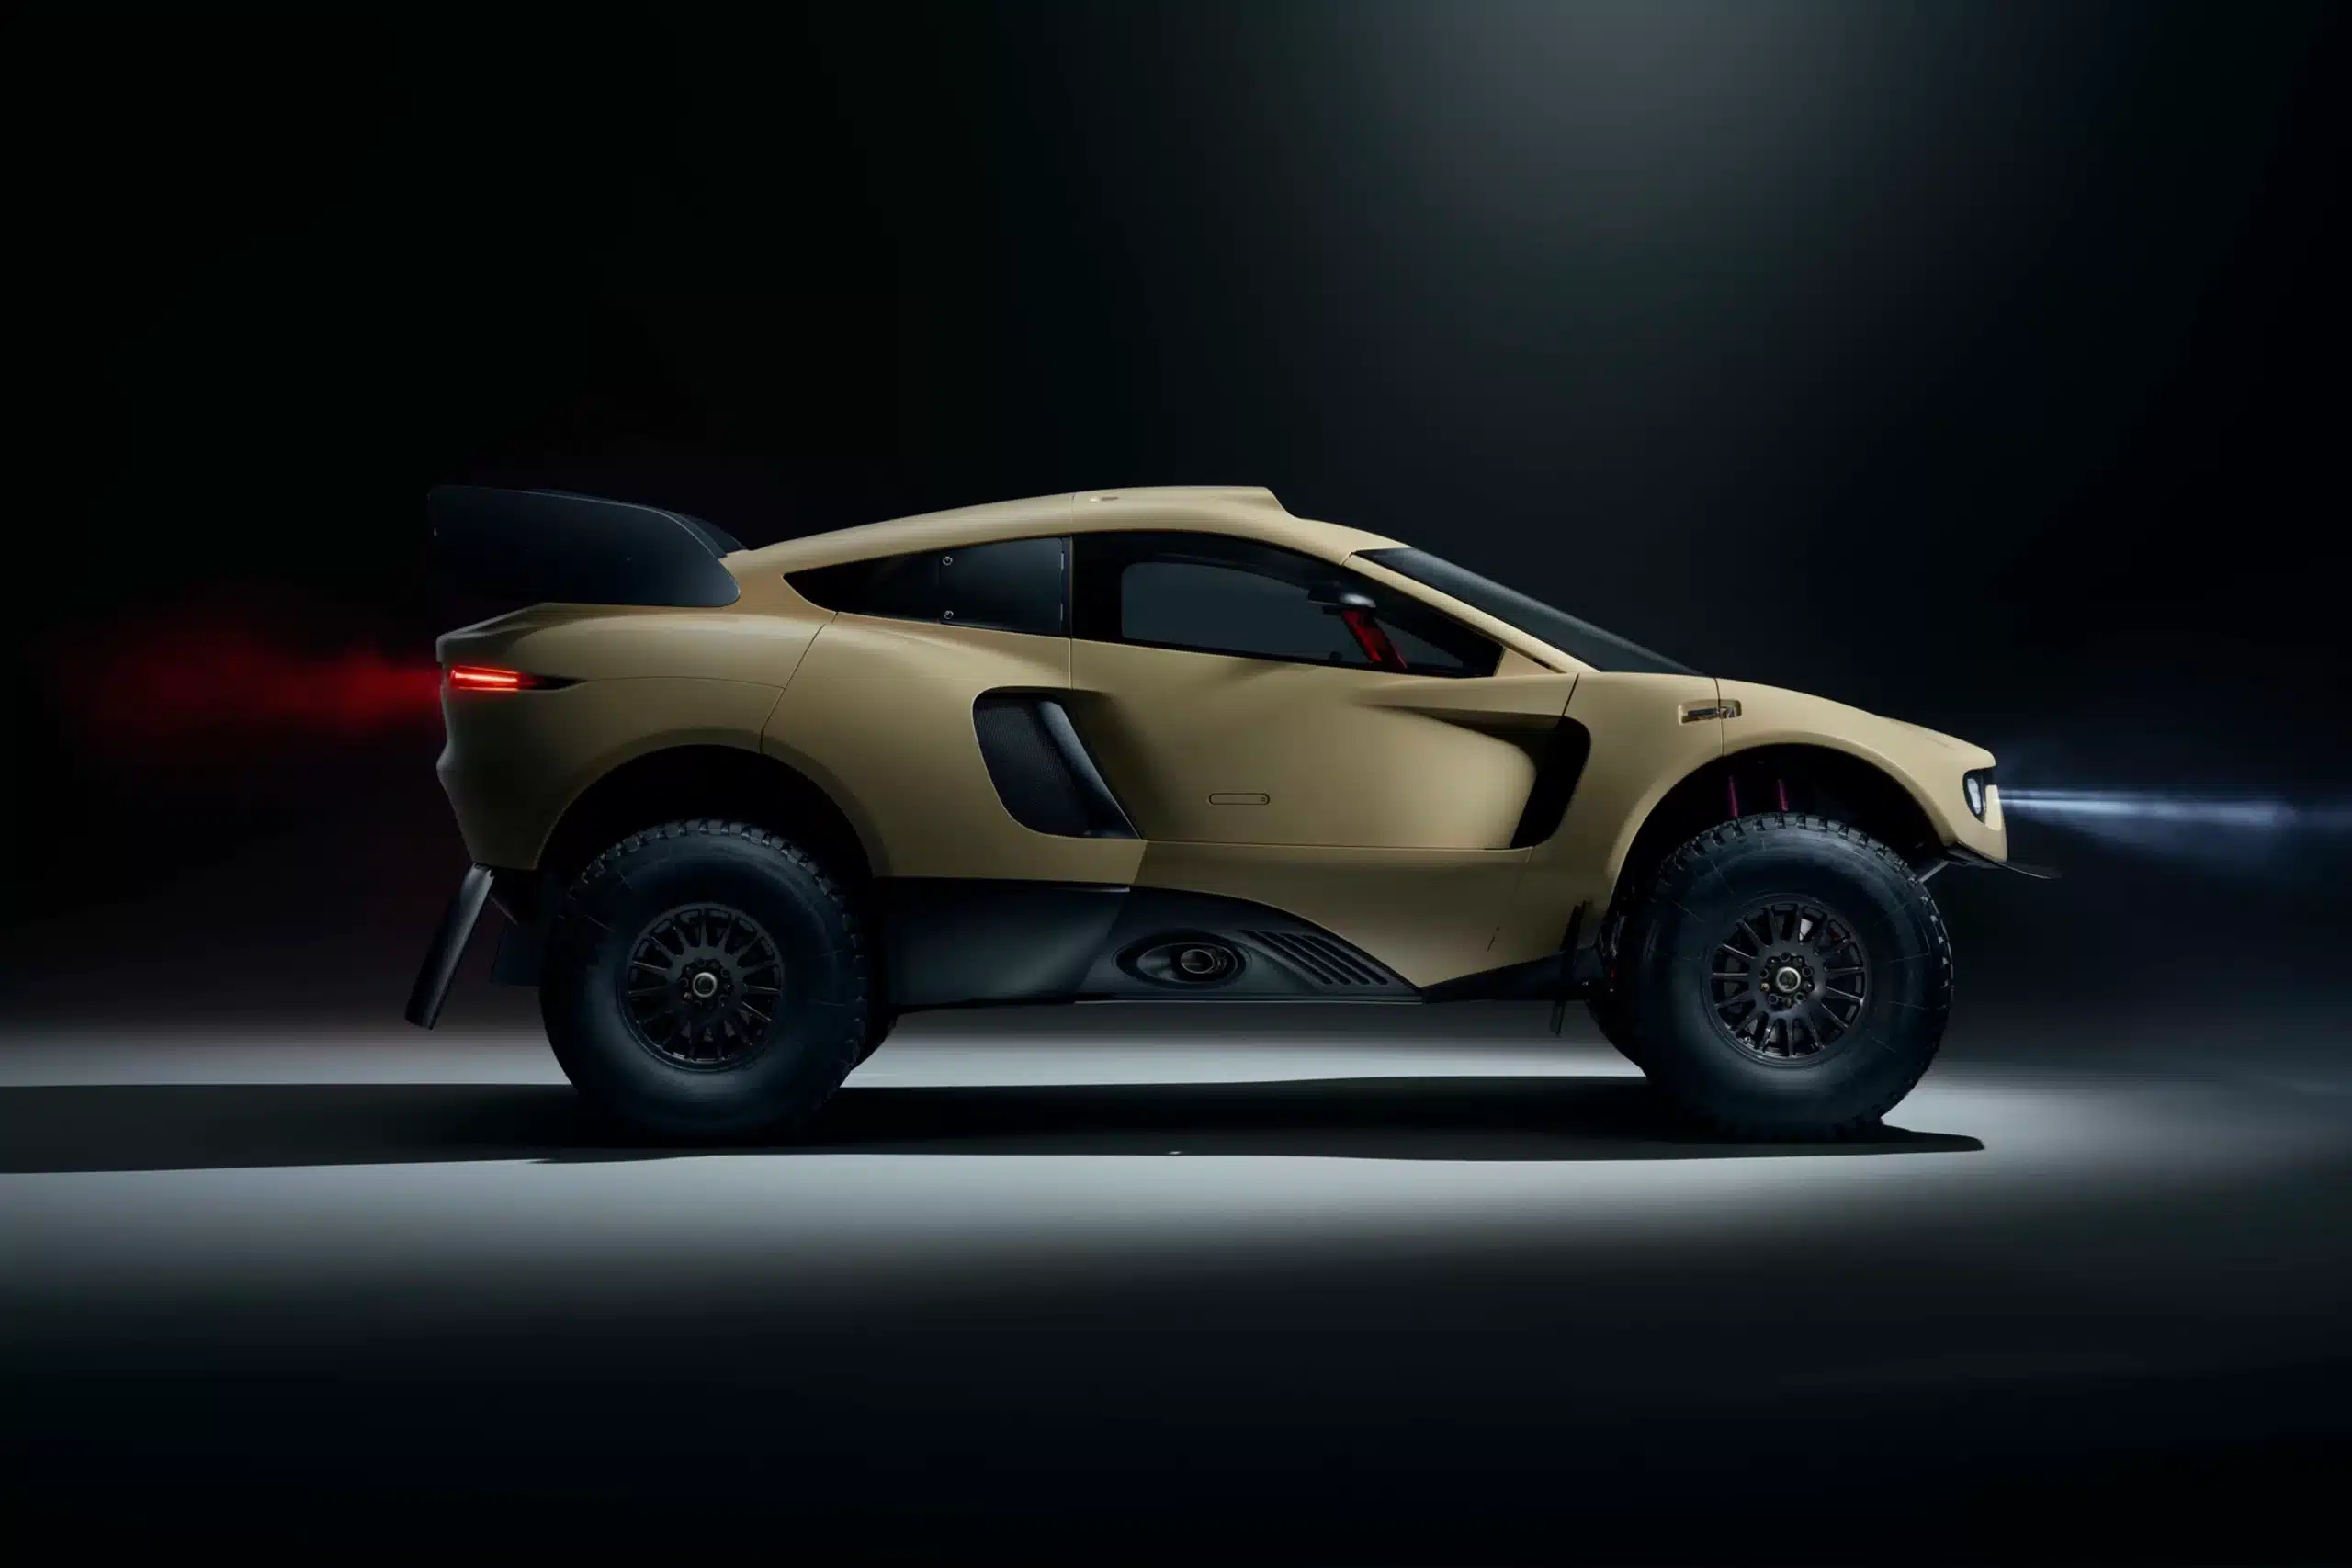 The $1.6 million Prodrive Hunter is the world's first off-road hypercar